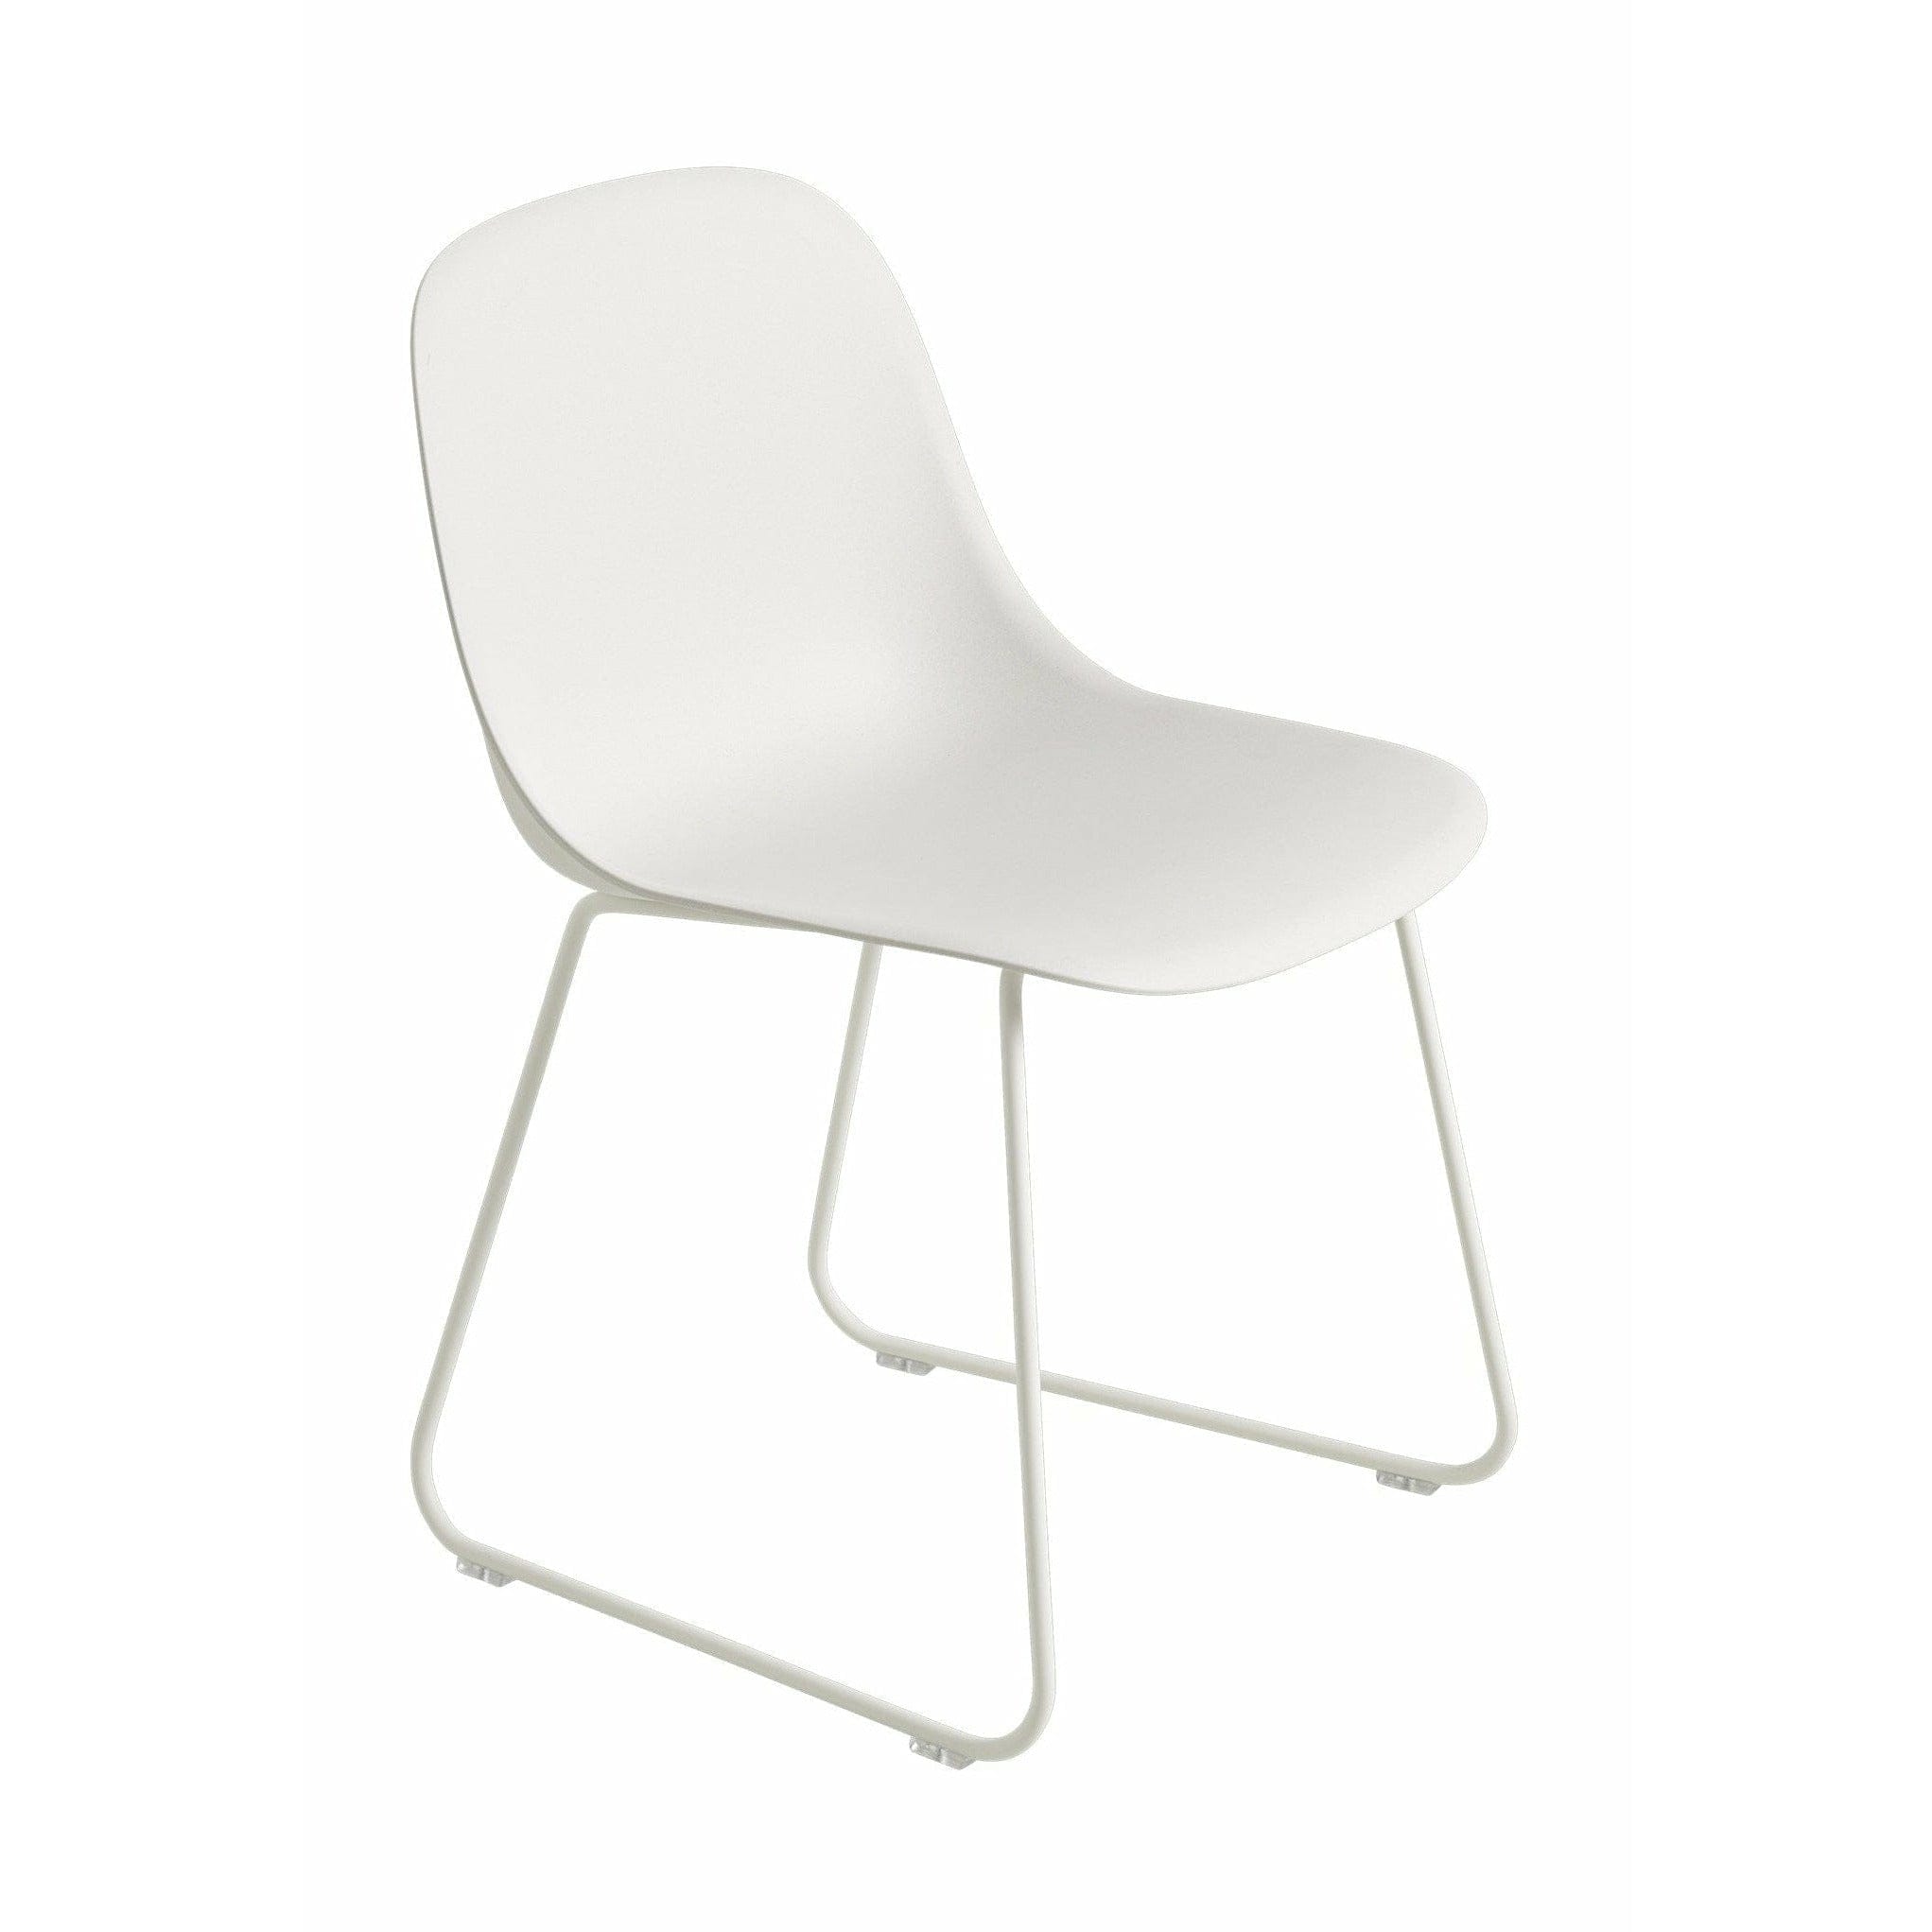 Muuto Fiber Side Chair Made Of Recycled Plastic Sled Base, Natural White/White